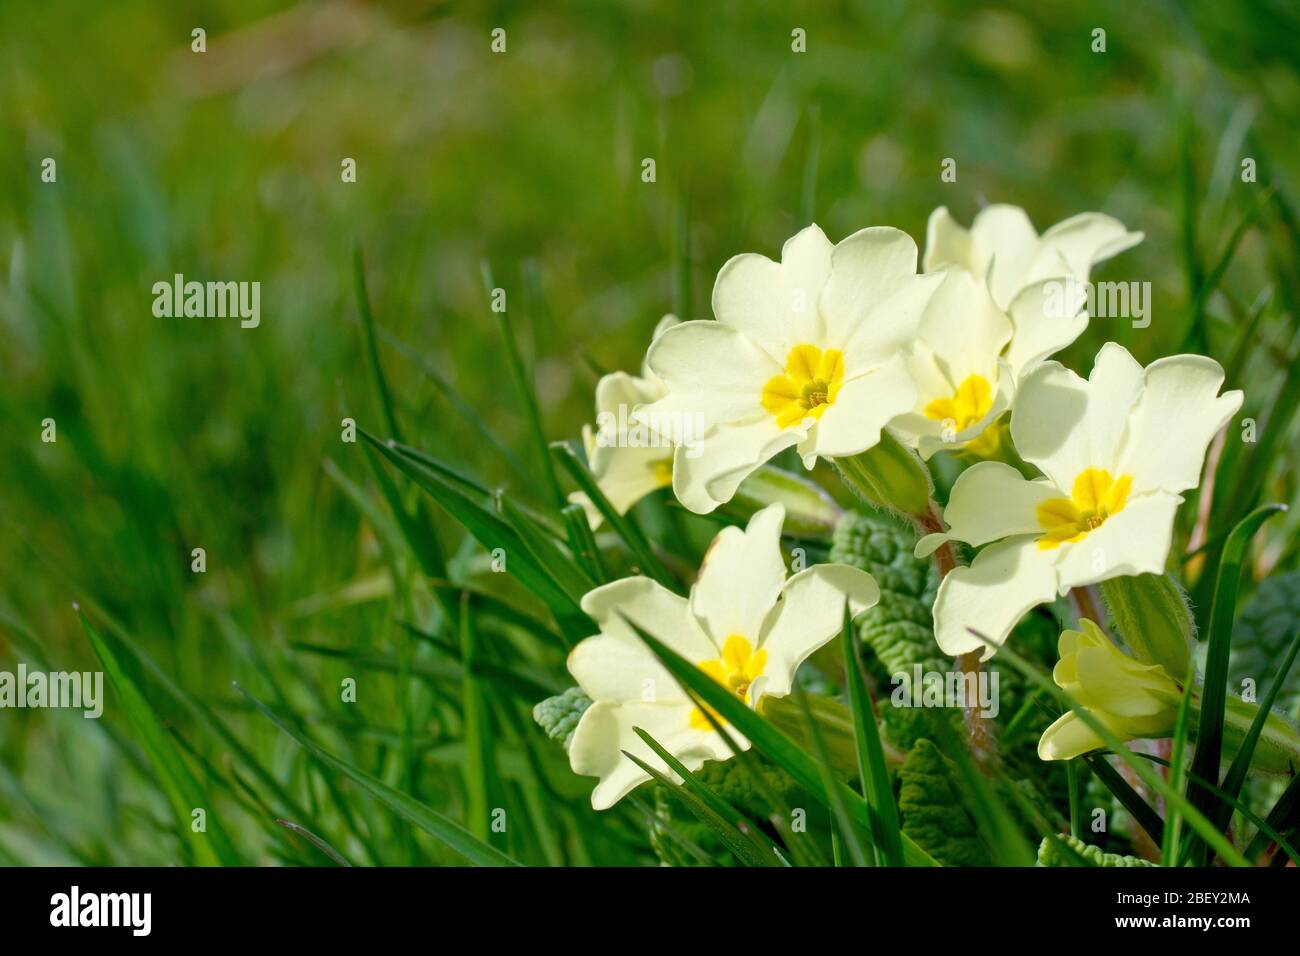 Primroses (primula vulgaris), close up of a group of flowers growing in the grass at the edge of a field. Stock Photo